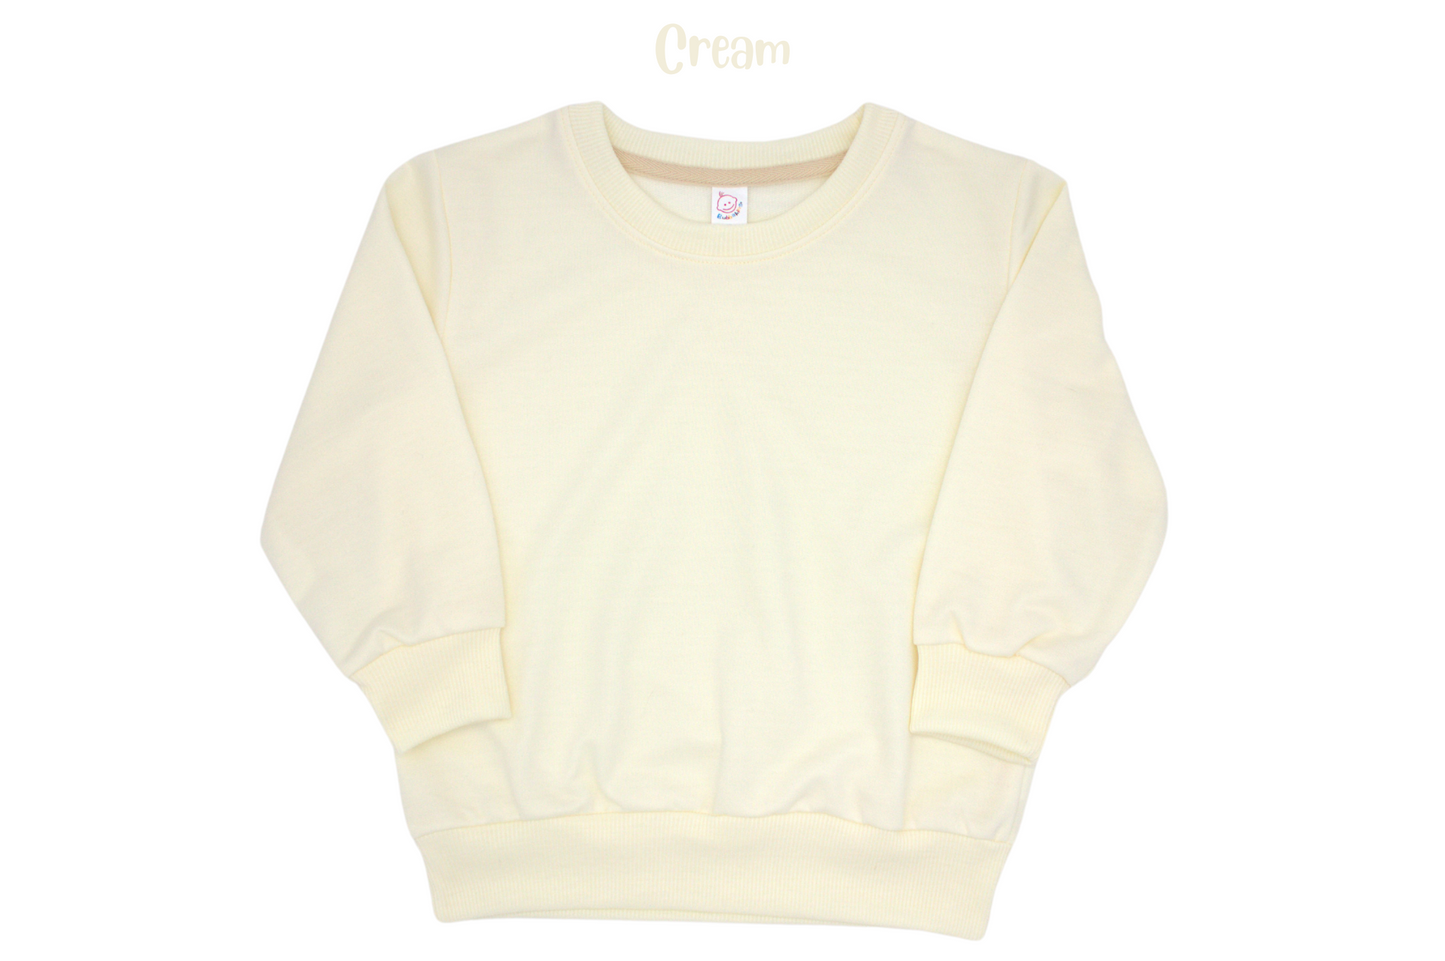 YOUTH, TODDLER & INFANT 100% Polyester SWEATSHIRT